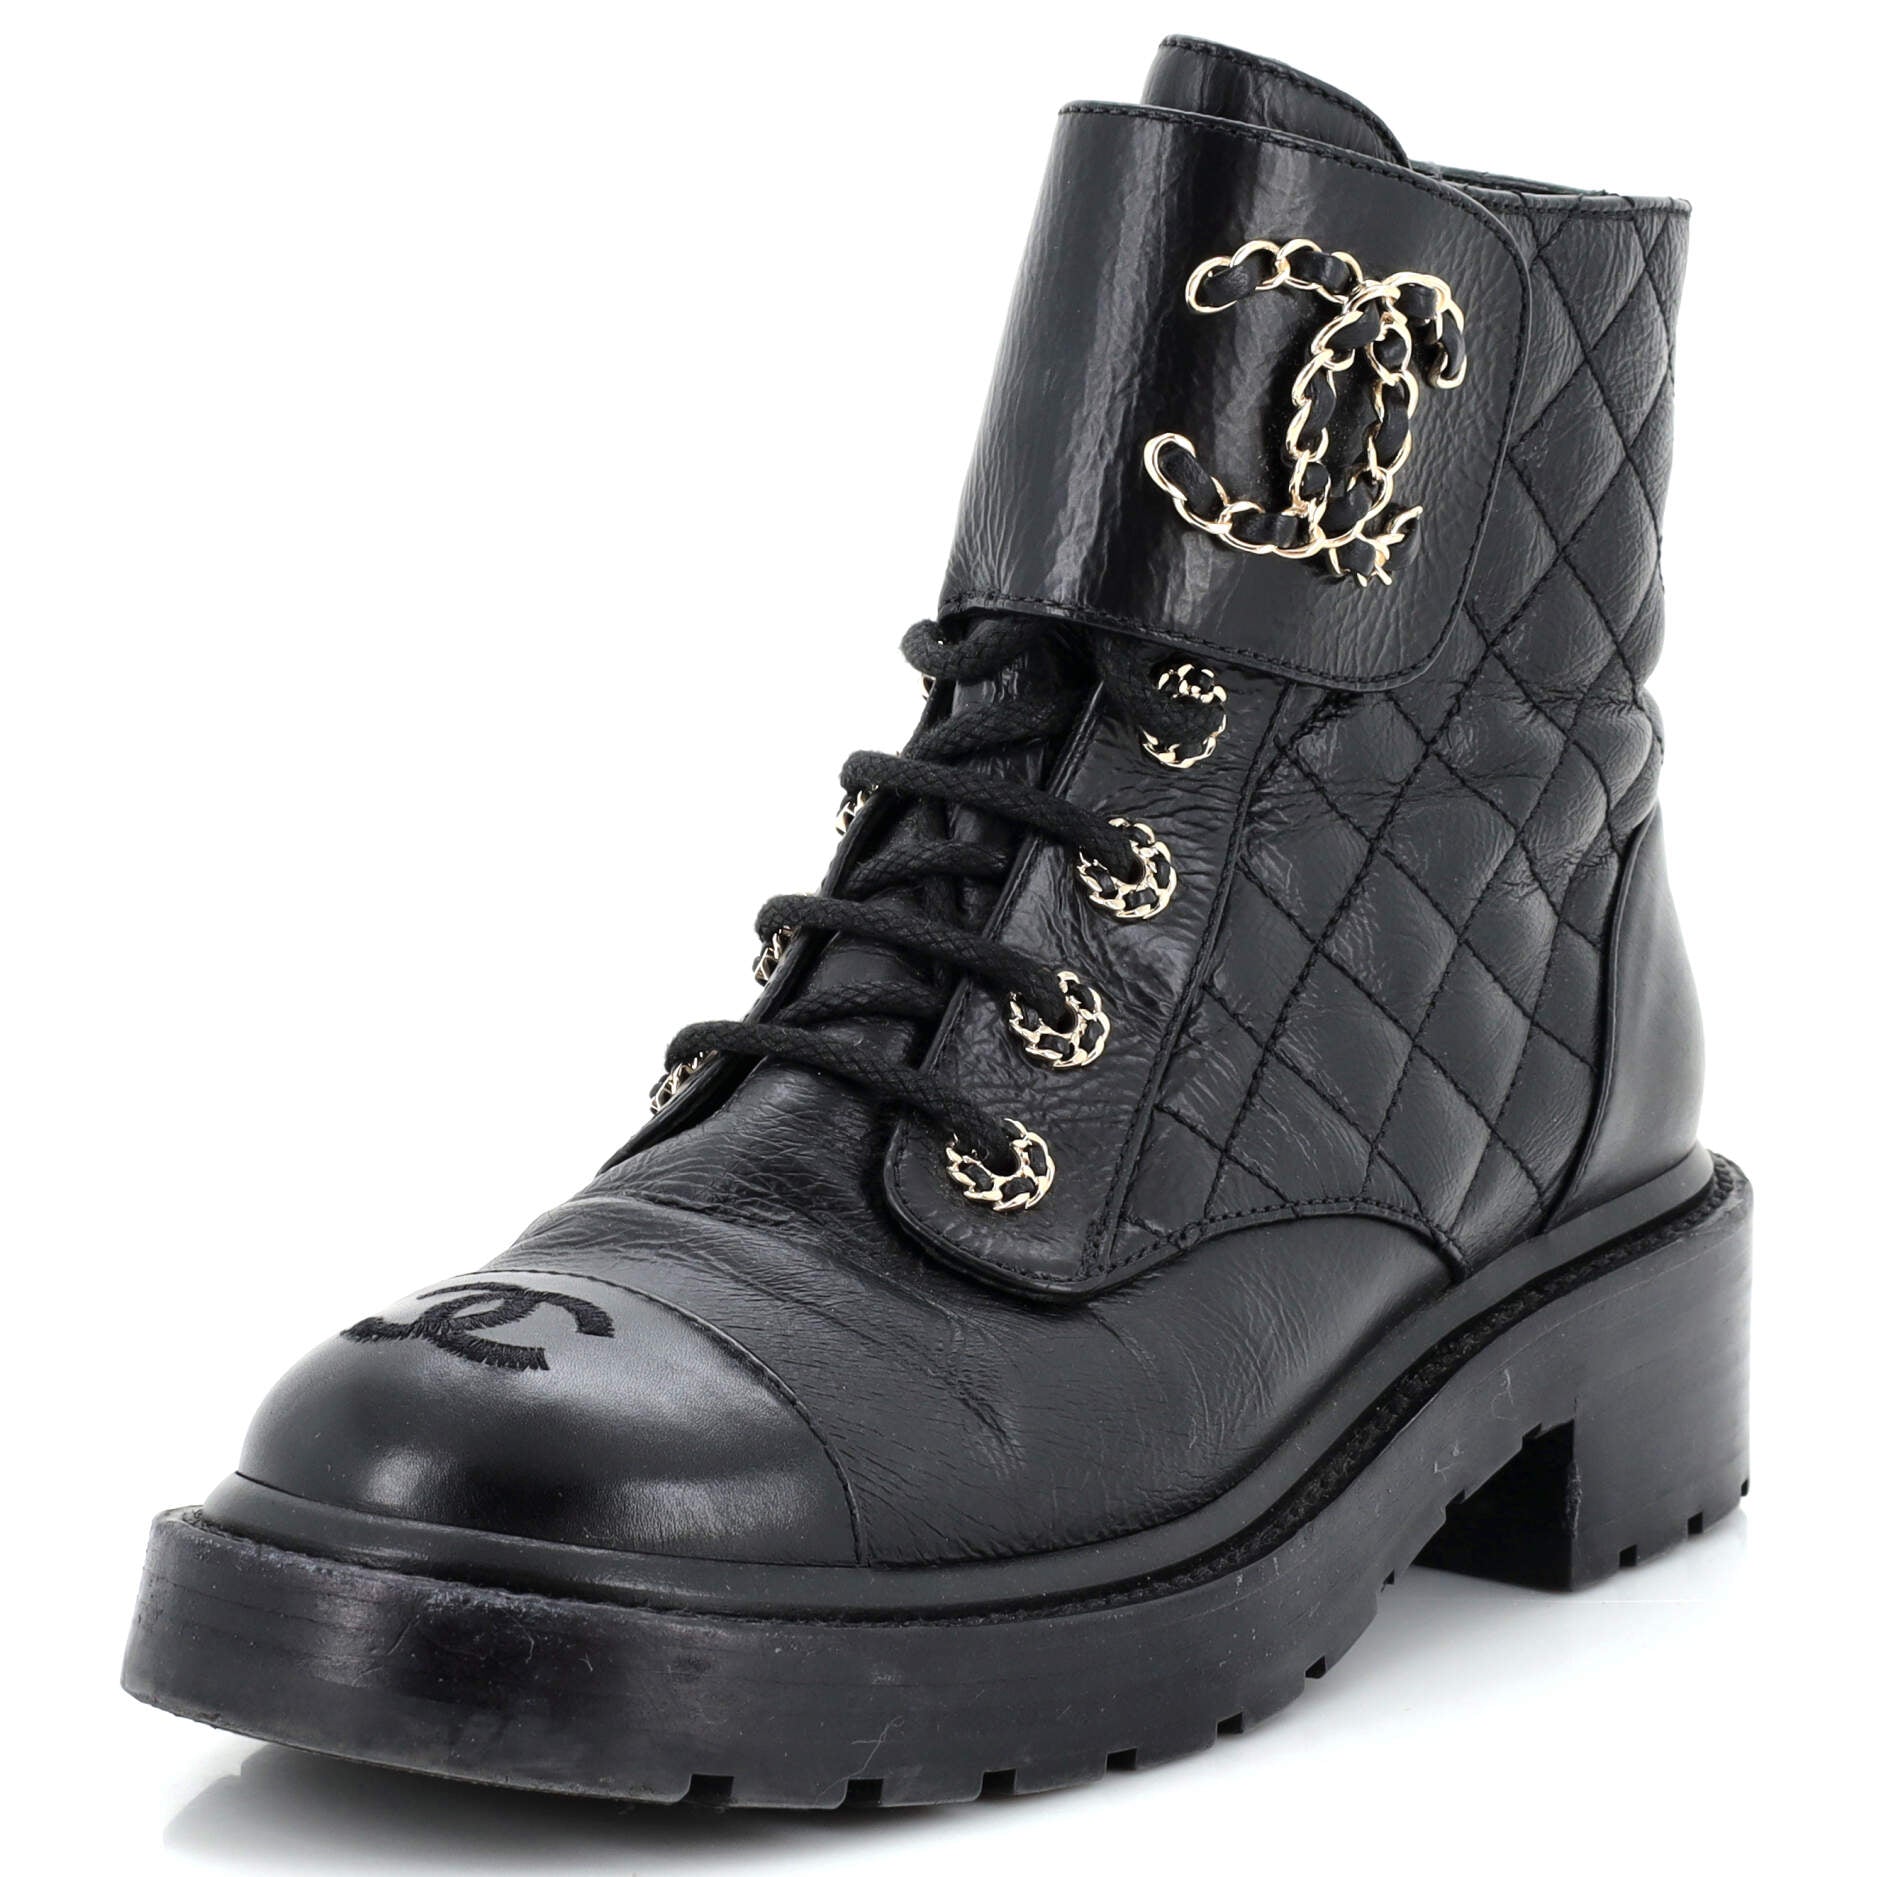 Women's Chain CC Cap Toe Lace Up Combat Boots Quilted Leather